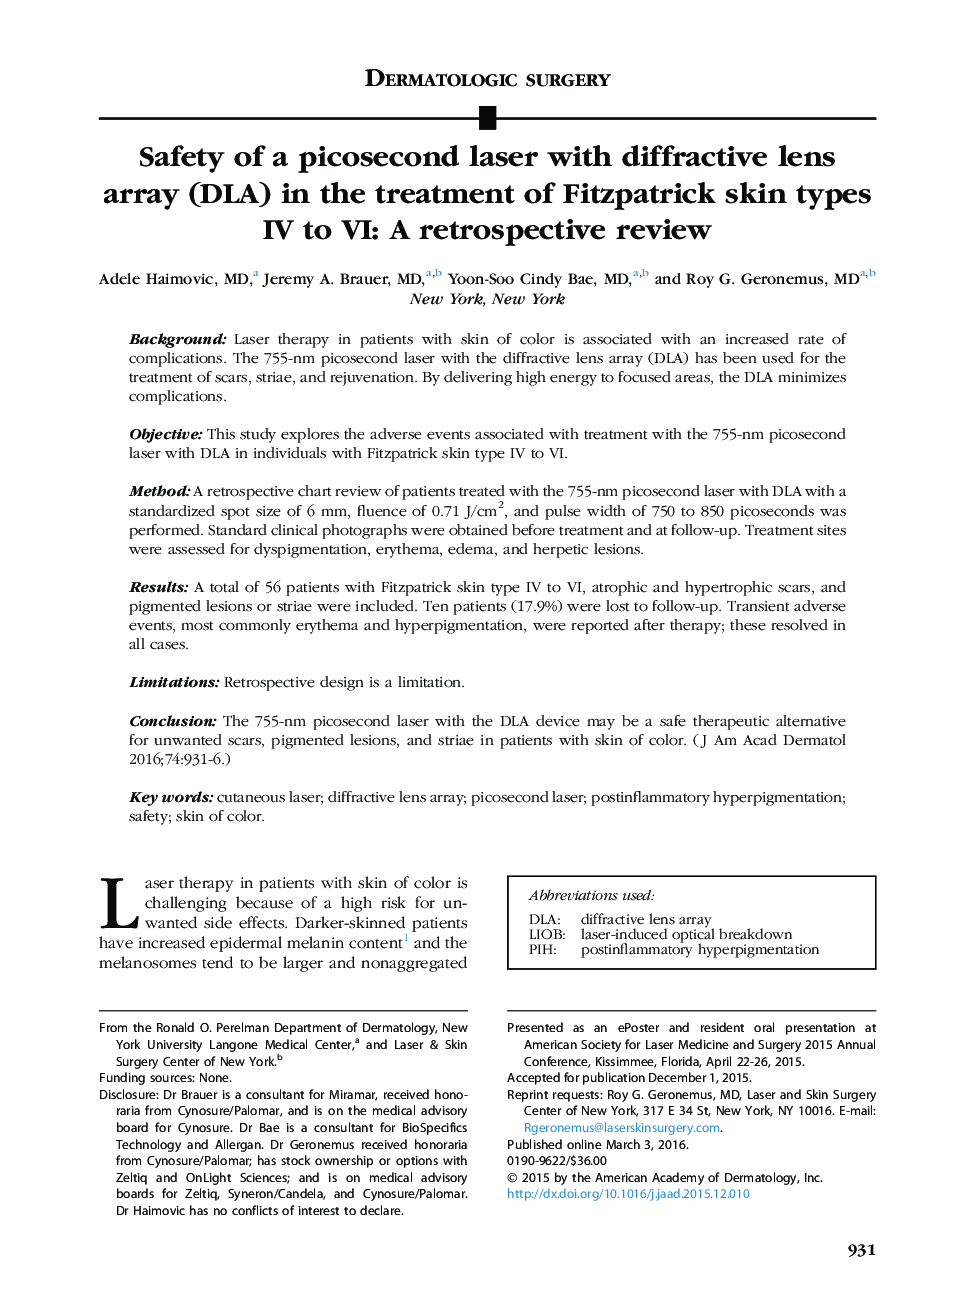 Dermatologic surgerySafety of a picosecond laser with diffractive lens array (DLA) in the treatment of Fitzpatrick skin types IV to VI: A retrospective review